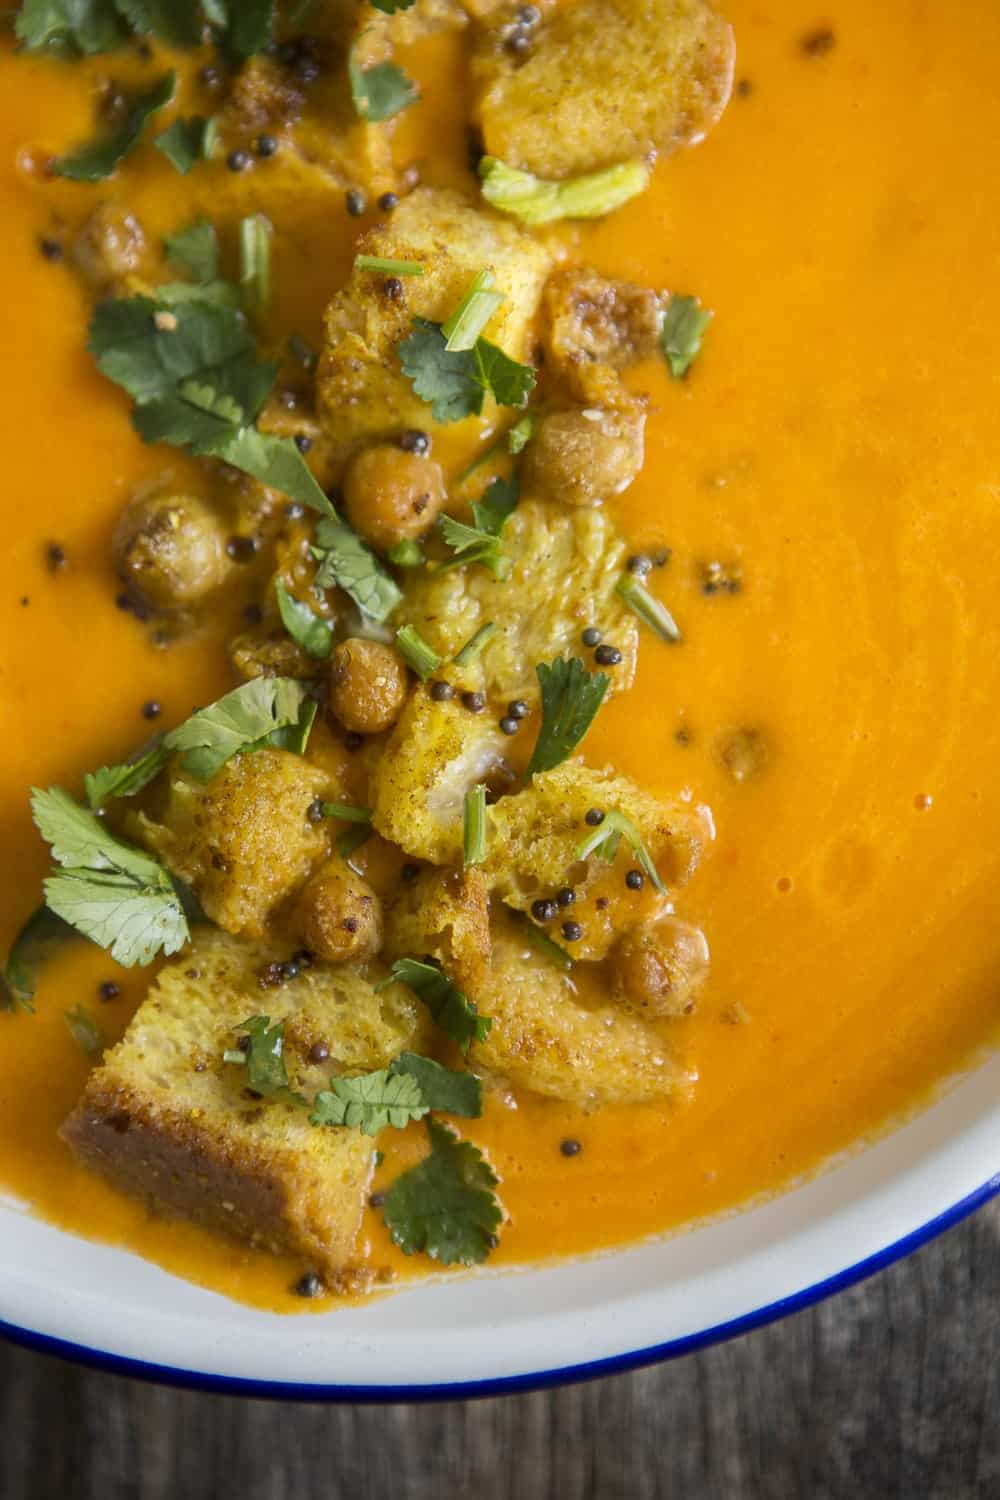 Pumpkin and Chickpea Soup with Curried Croutons